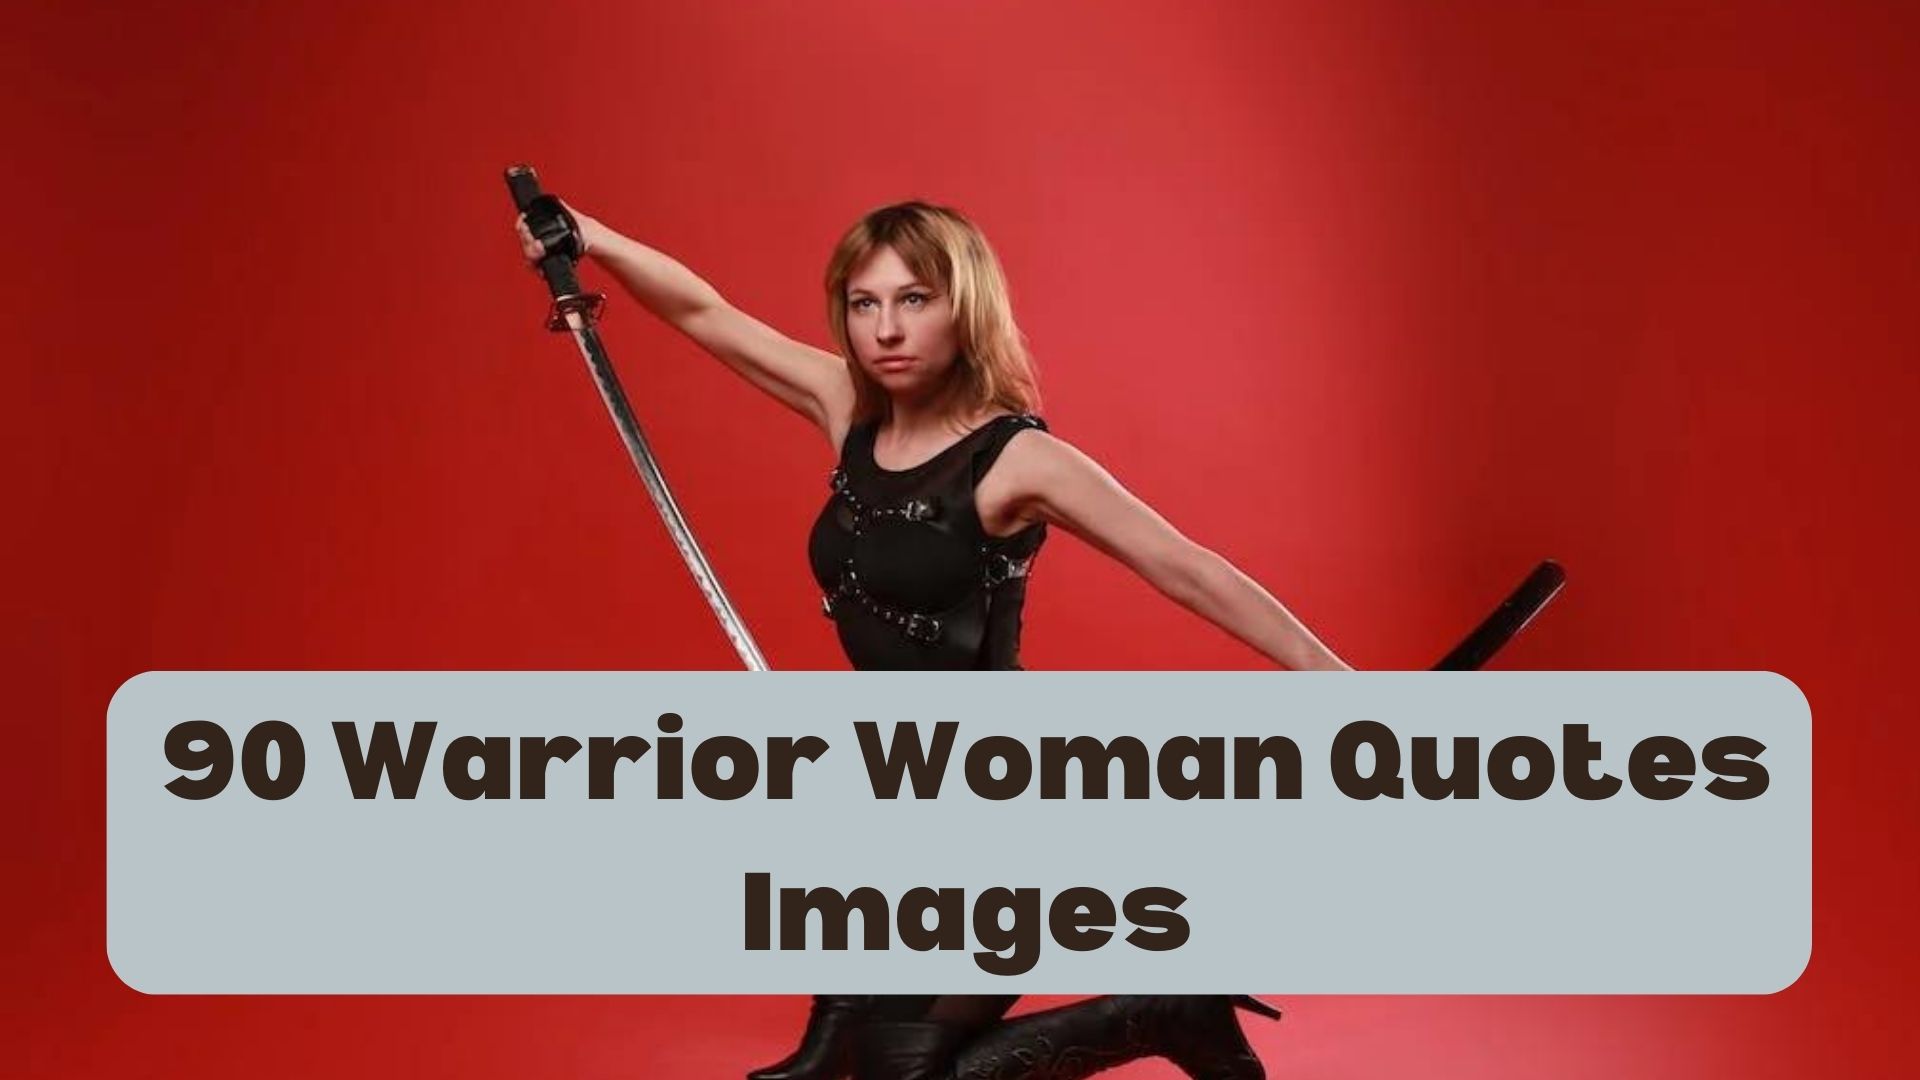 Woman Warrior Quotes Images